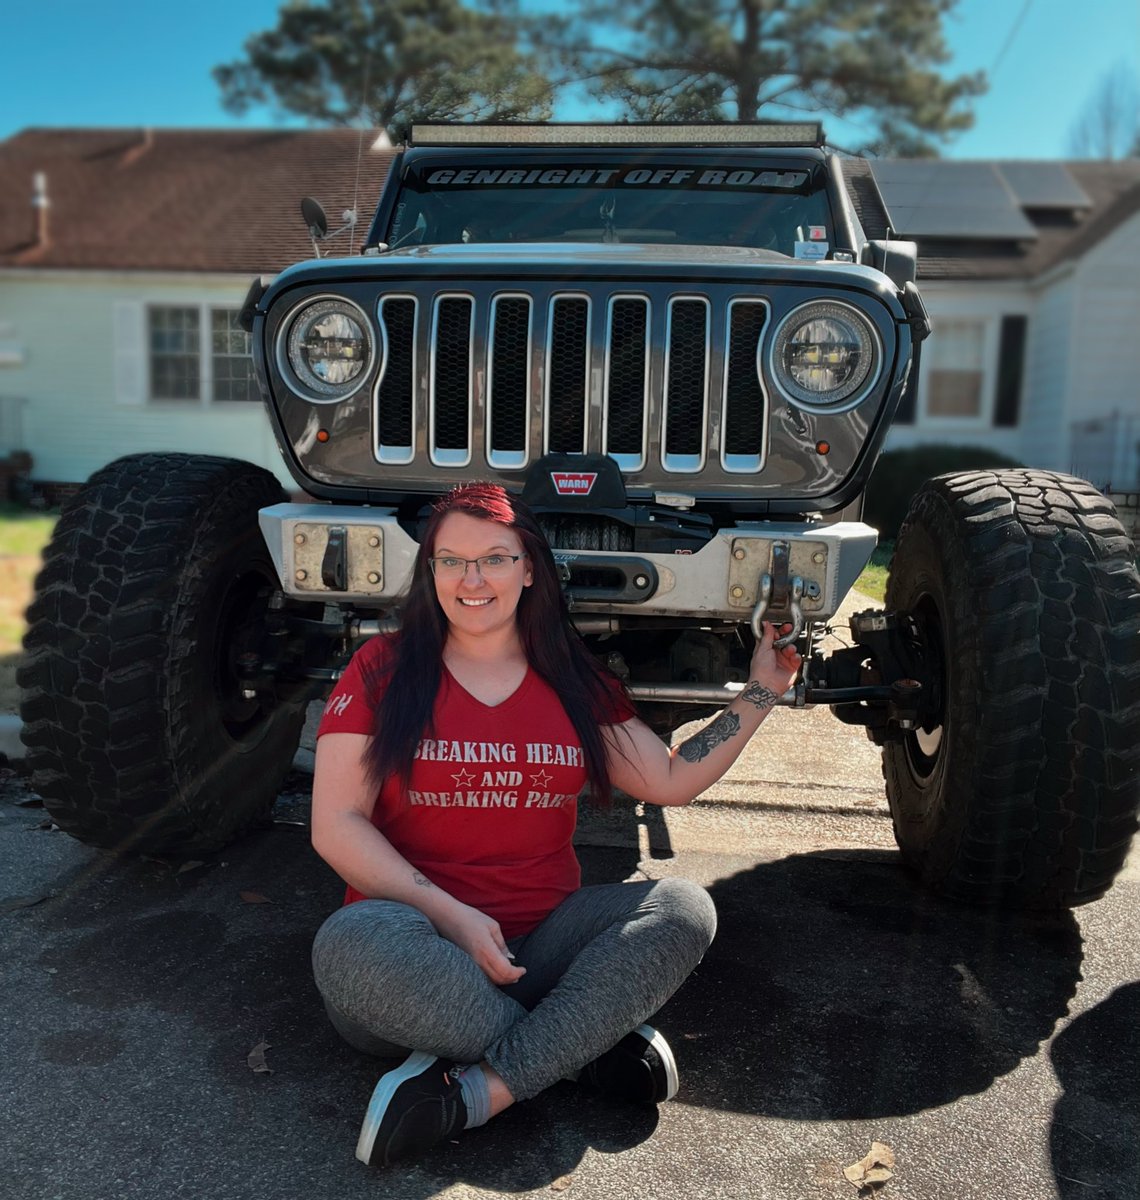 Something about today is Valentine’s Day or something… remember she wants Jeep parts not flowers 😉

 #shewantsjeepparts #wrangler #jeeps  #teamprp #valentinesday  #teamrk #jeepsofinstagram #teammt #genrightoffroad #onetonjeeps